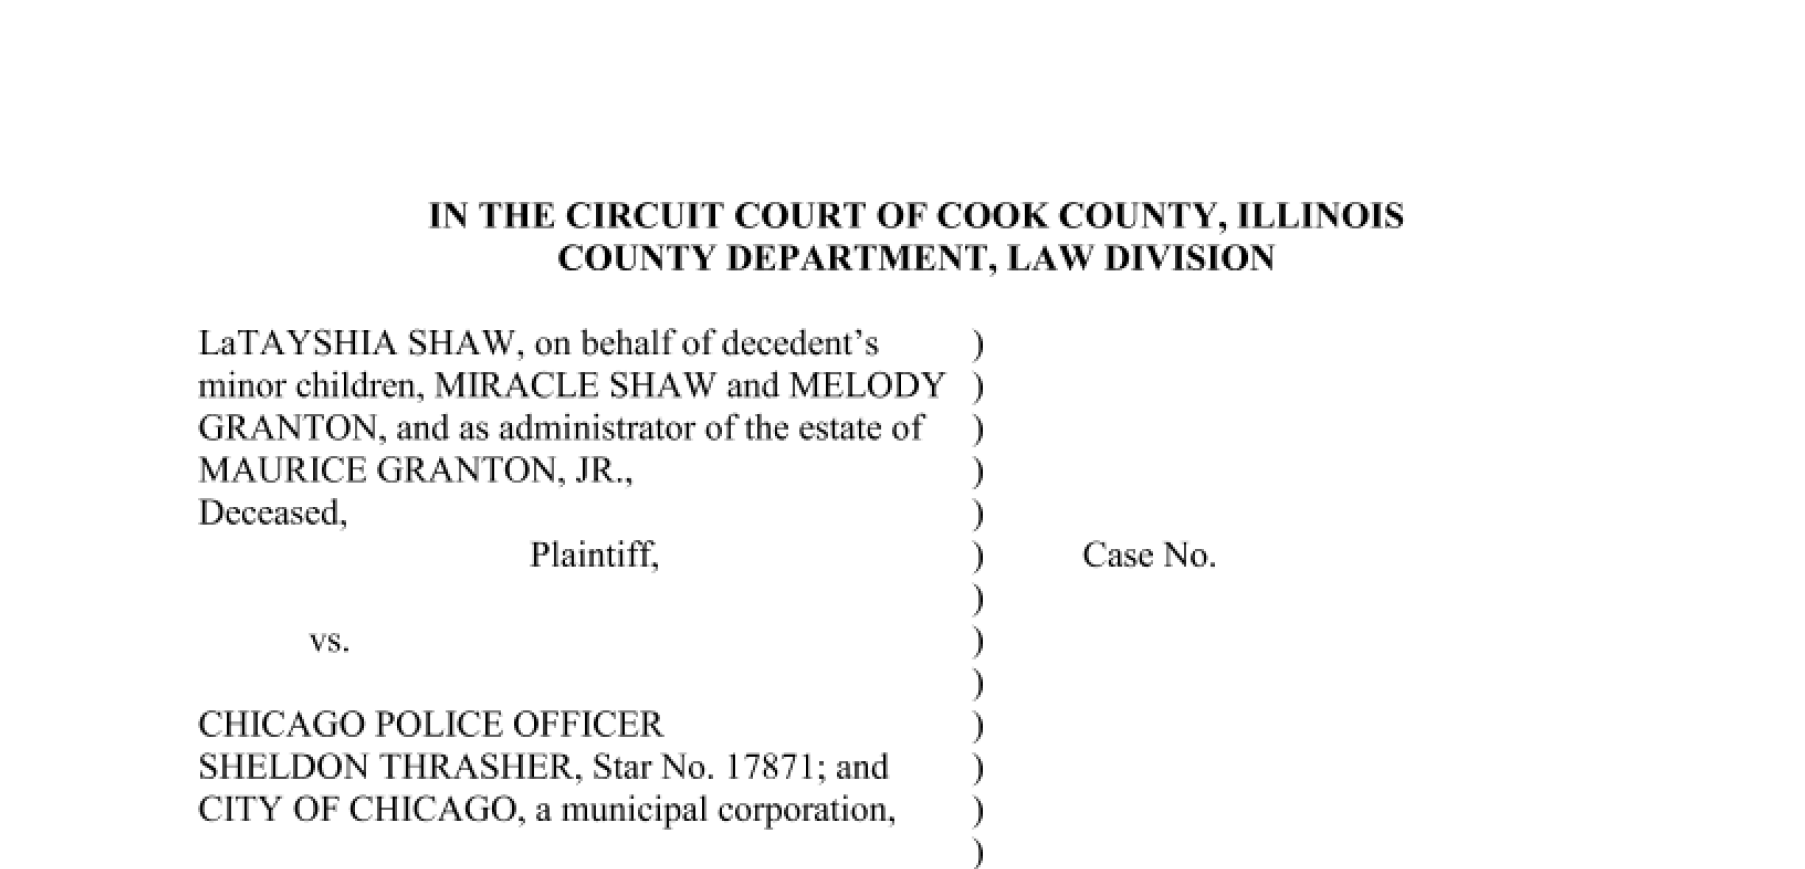 Click here to read the full complaint.